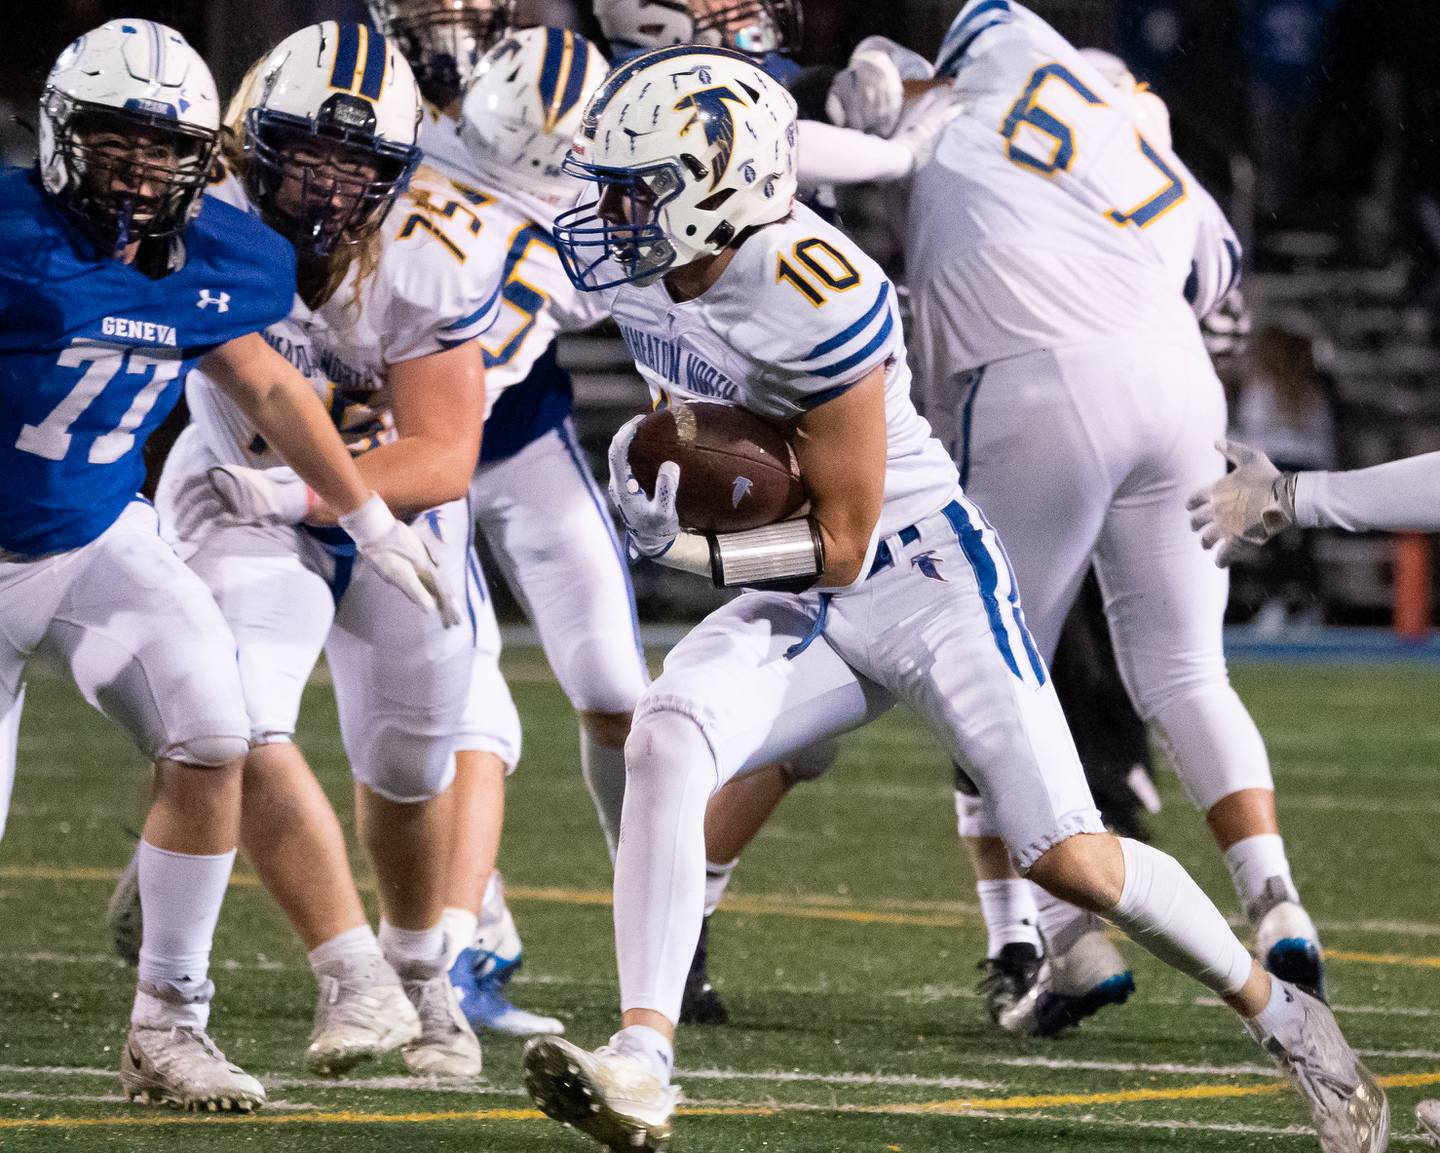 Wheaton North’s Tyler O'connor (10) carries the ball against Geneva during a football game at Geneva High School on Friday, Oct 14, 2022.